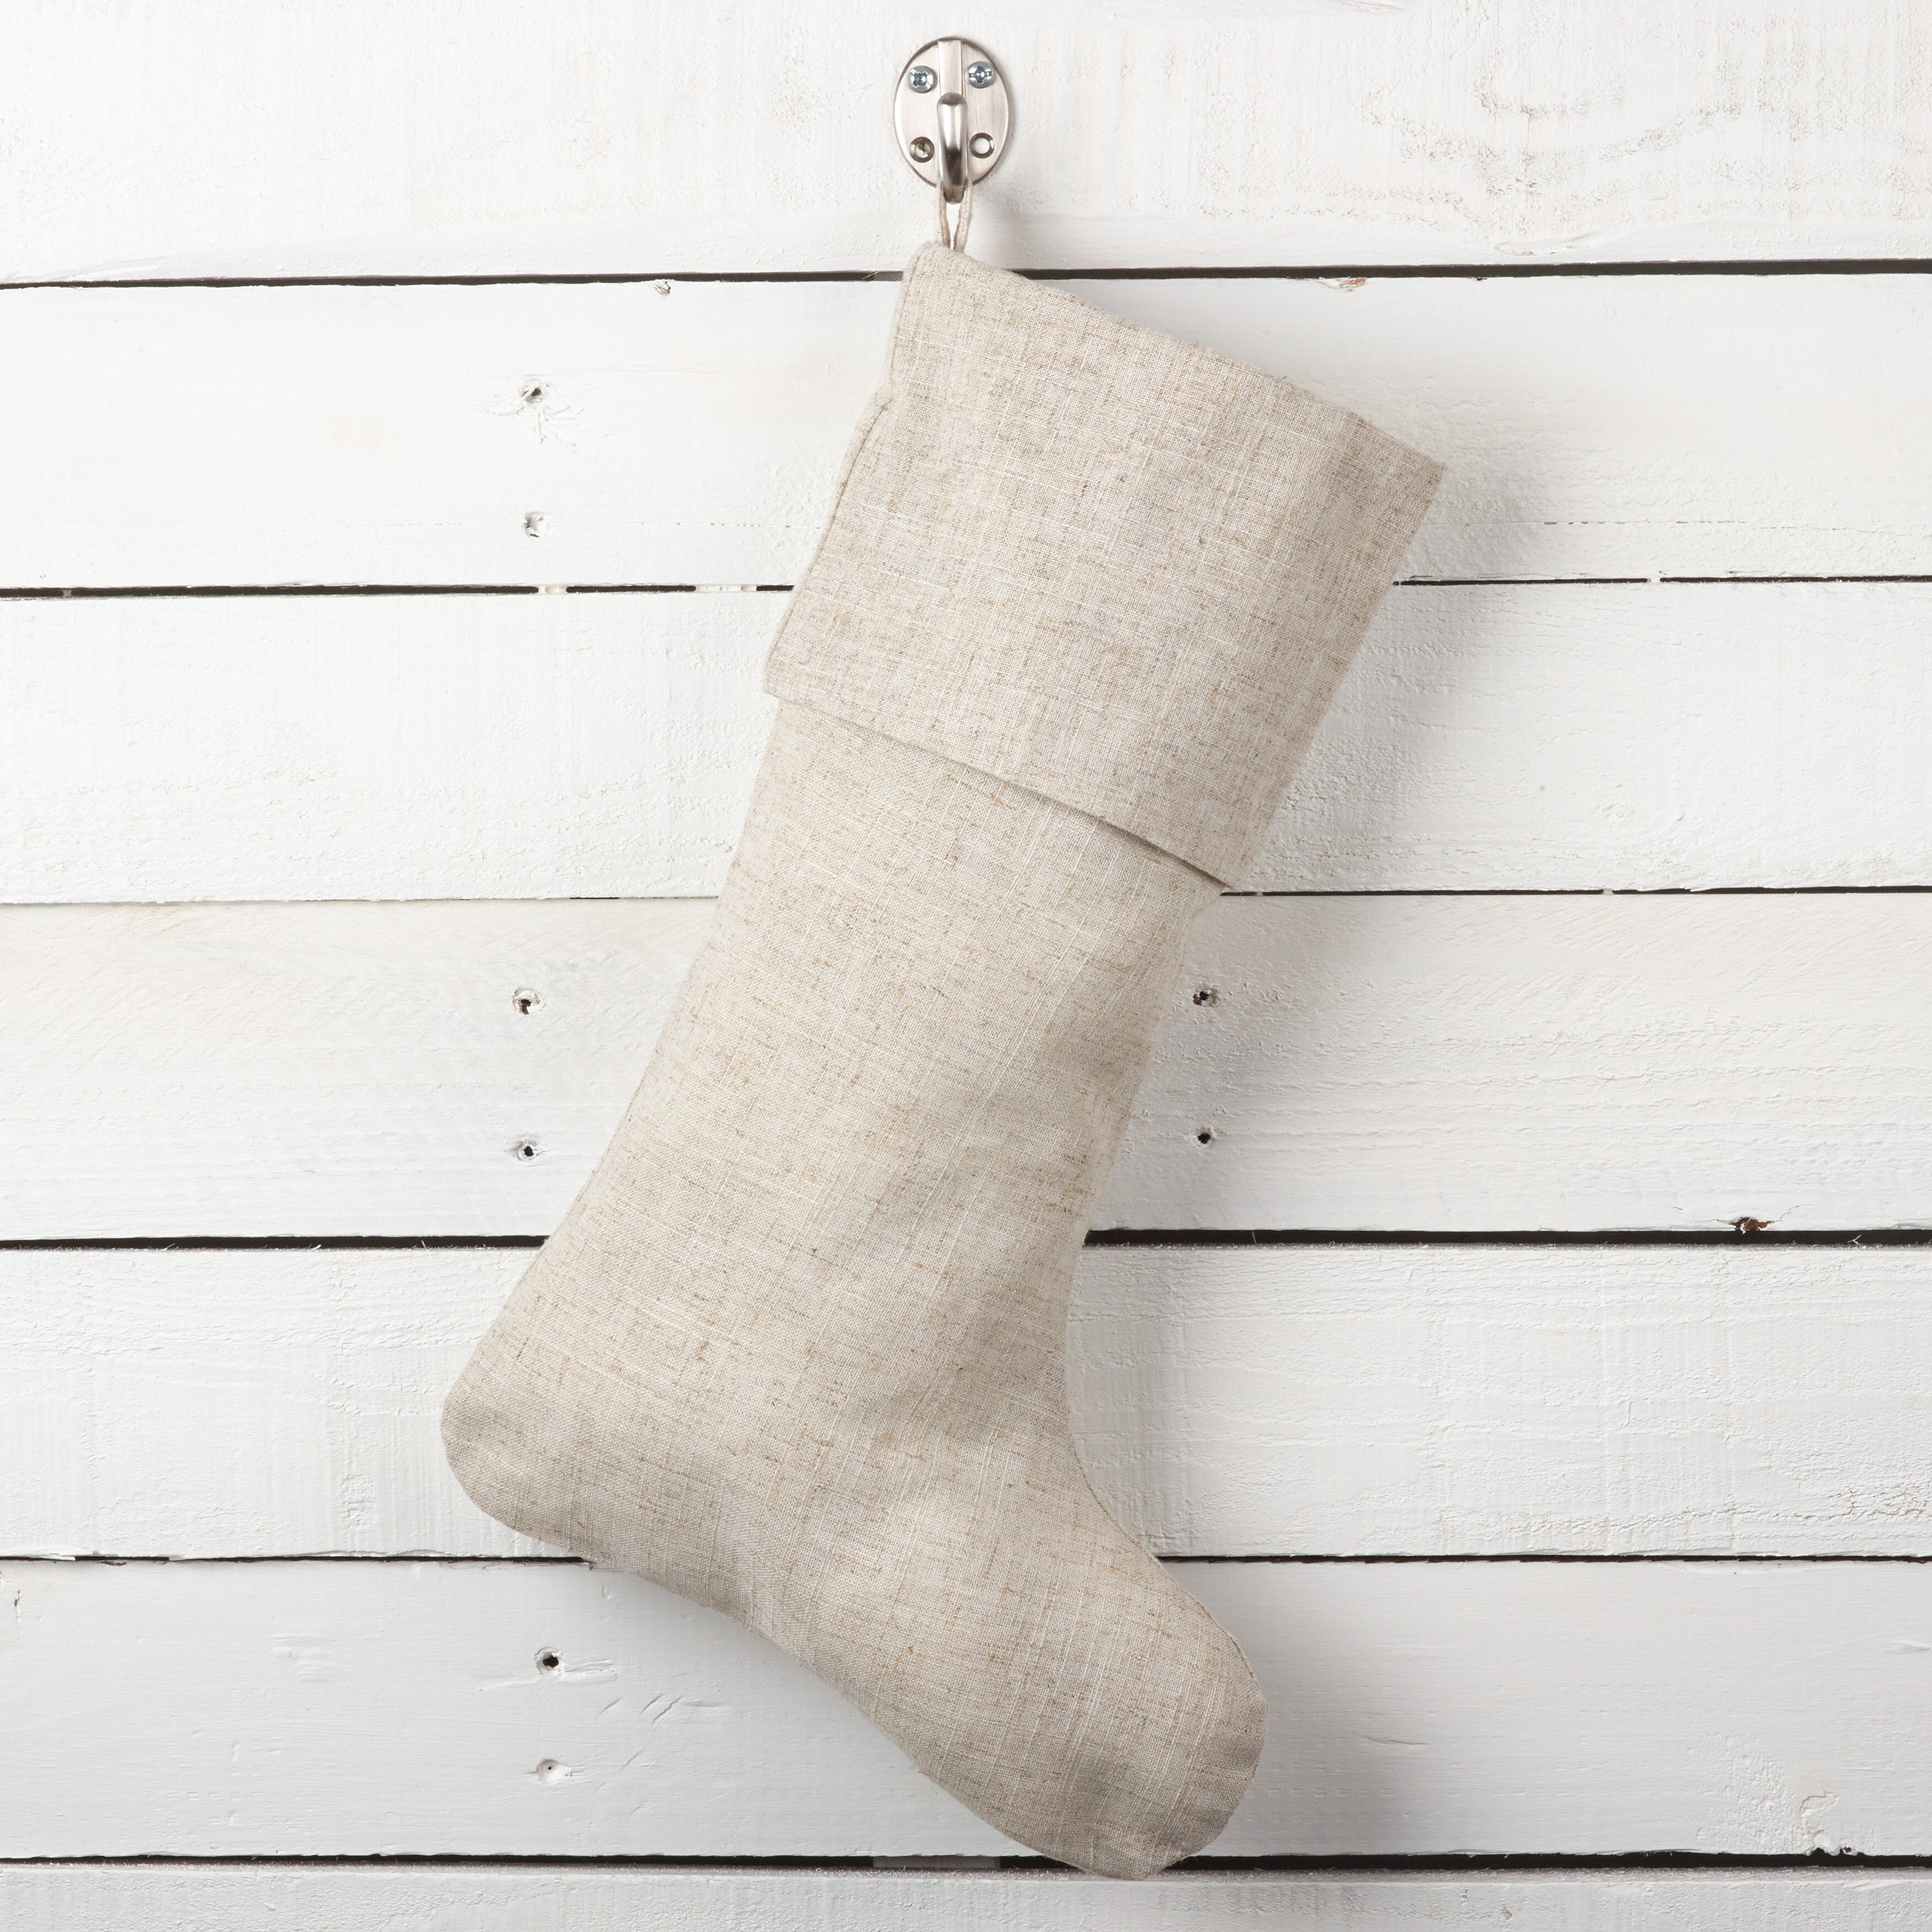 https://ak1.ostkcdn.com/images/products/is/images/direct/5a4882a827c3ed2e72596a58a0c2832fb31c560e/Natural-Linen-Blend-Decorative-Christmas-Stocking.jpg